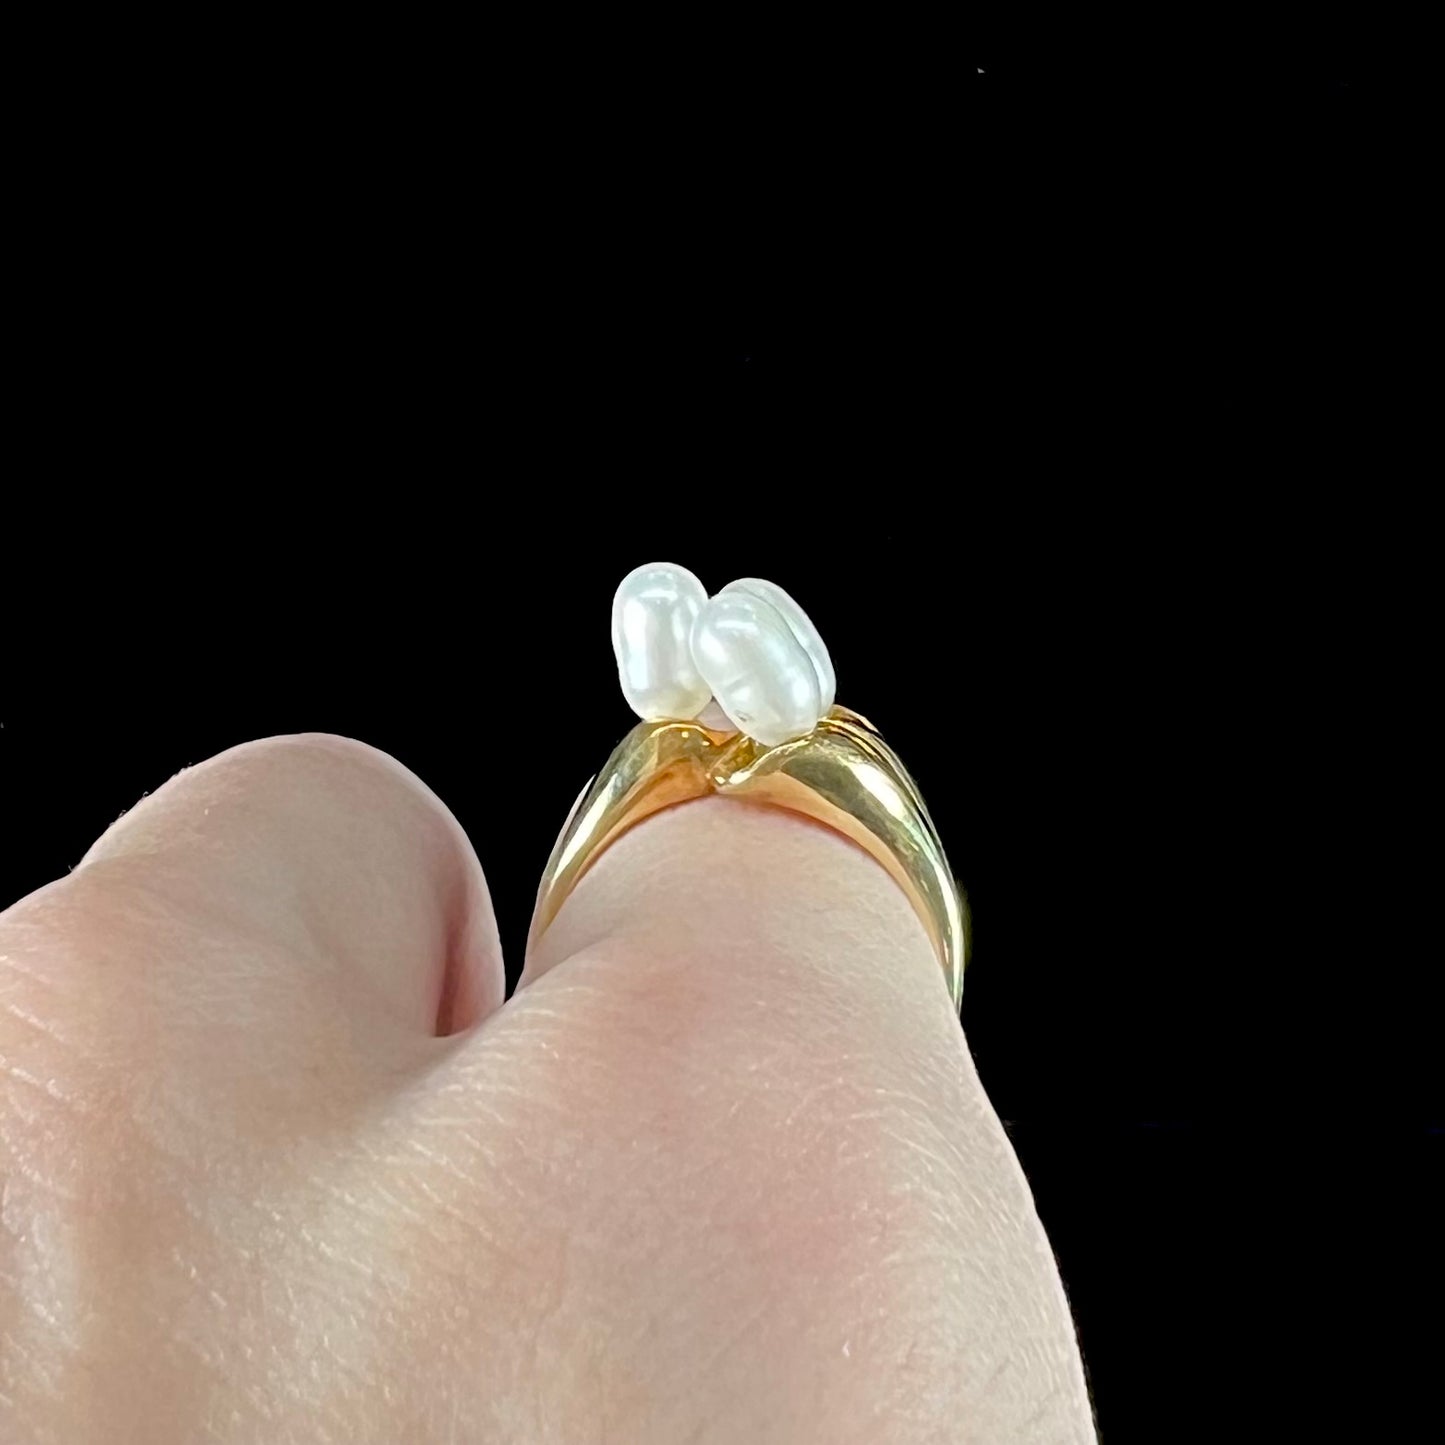 A ladies' vintage, midcentury style freshwater pearl cluster ring in yellow gold.